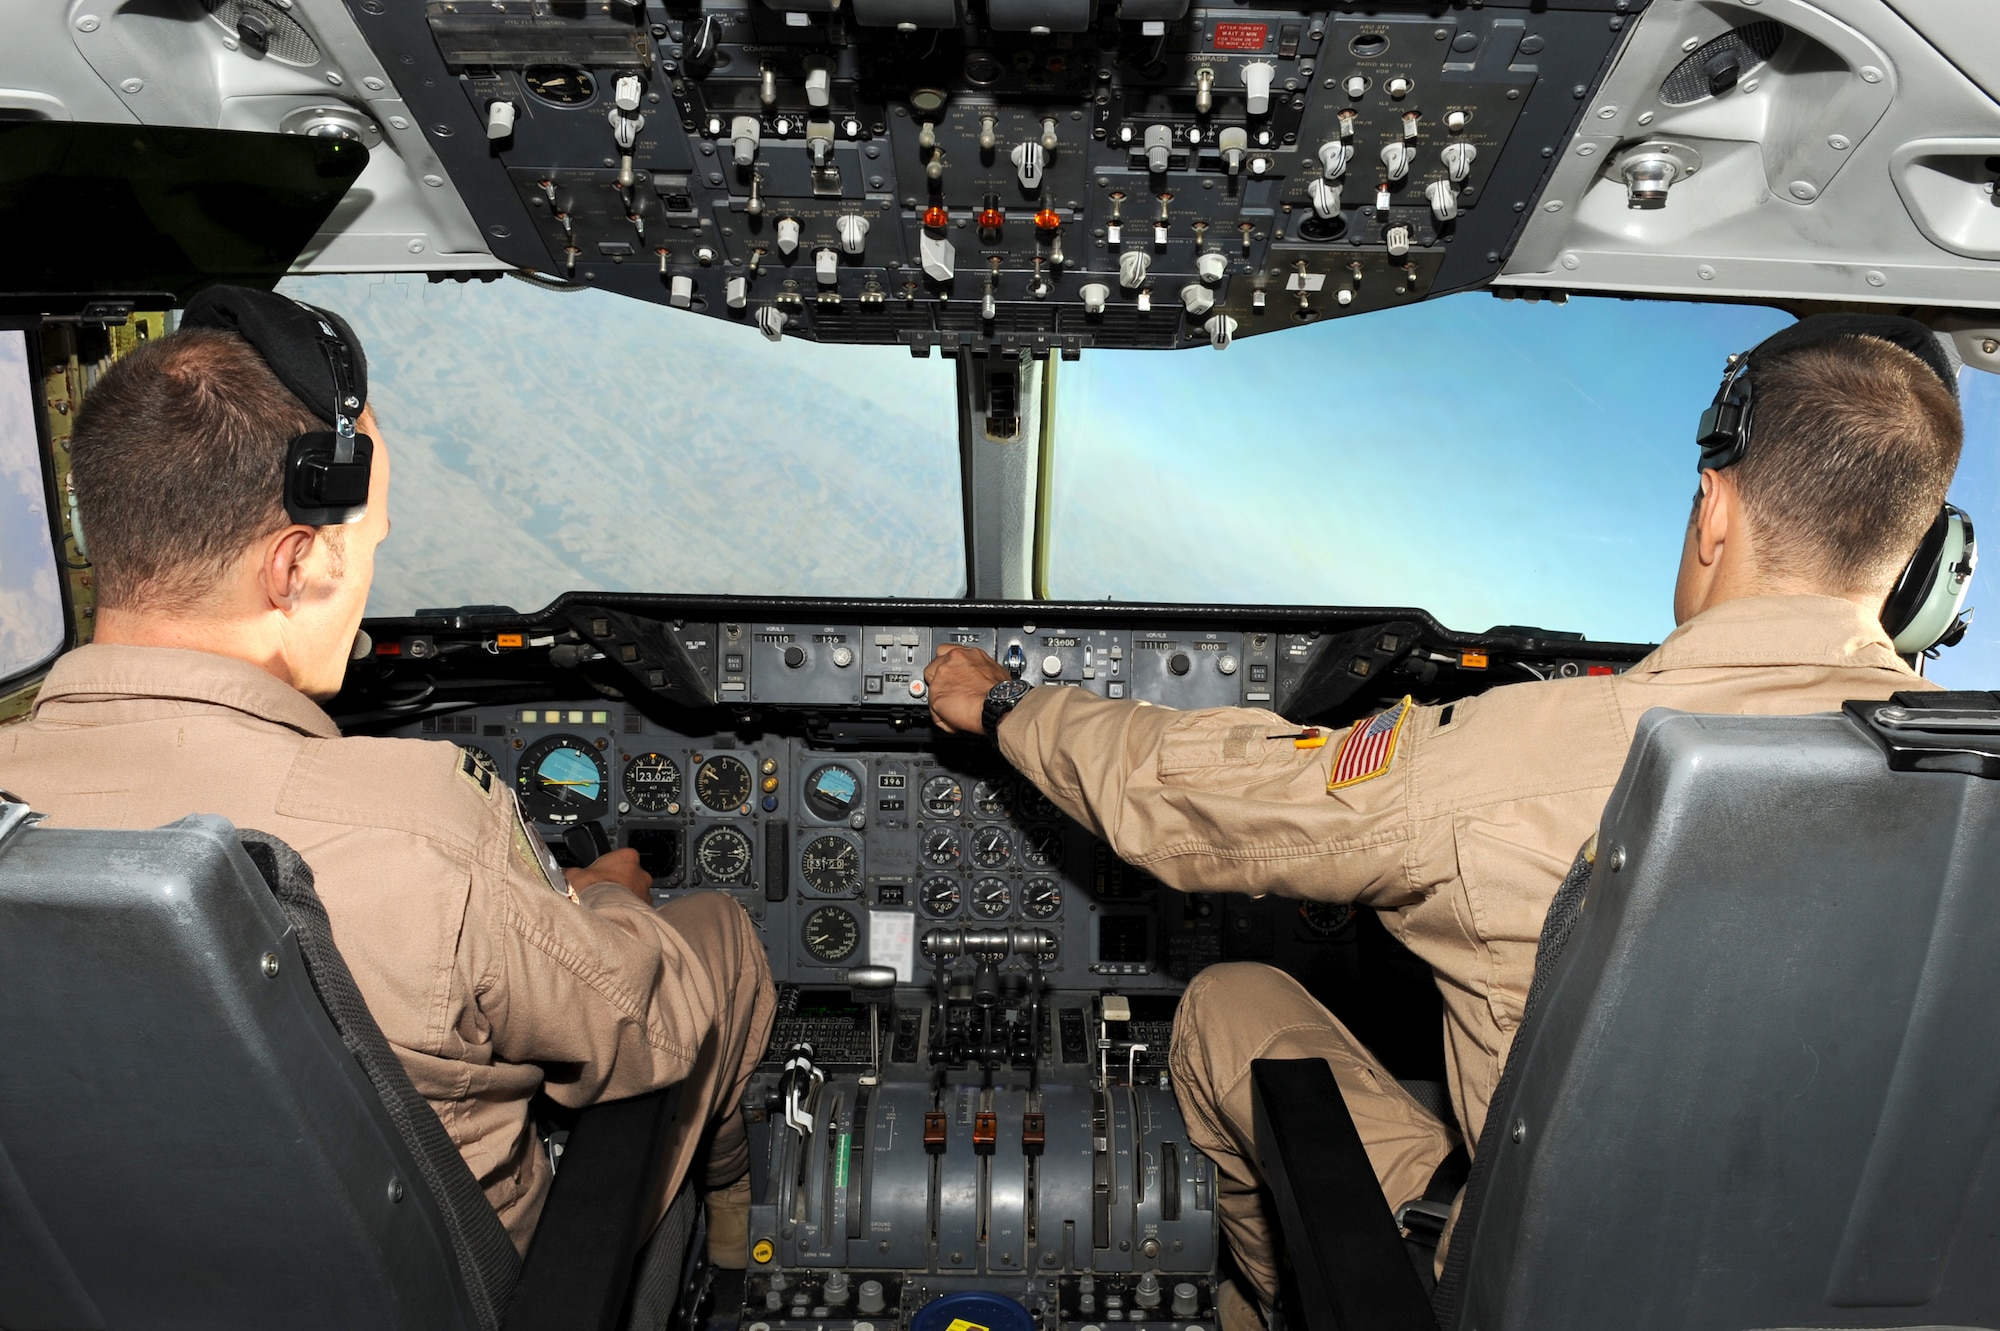 SOUTHWEST ASIA - U.S. Air Force Capt. Vincent Wright, aircraft commander, left, and 1st Lt. Kurt Rommel, co-pilot, right, fly a KC-10 Extender during refueling operations Sept. 18, 2012. Wright and Rommel are deployed to the 380th Air Expeditionary Wing as part of the 908th Expeditionary Aerial Refueling Squadron. (U.S. Air Force photo/Master Sgt. Scott MacKay)